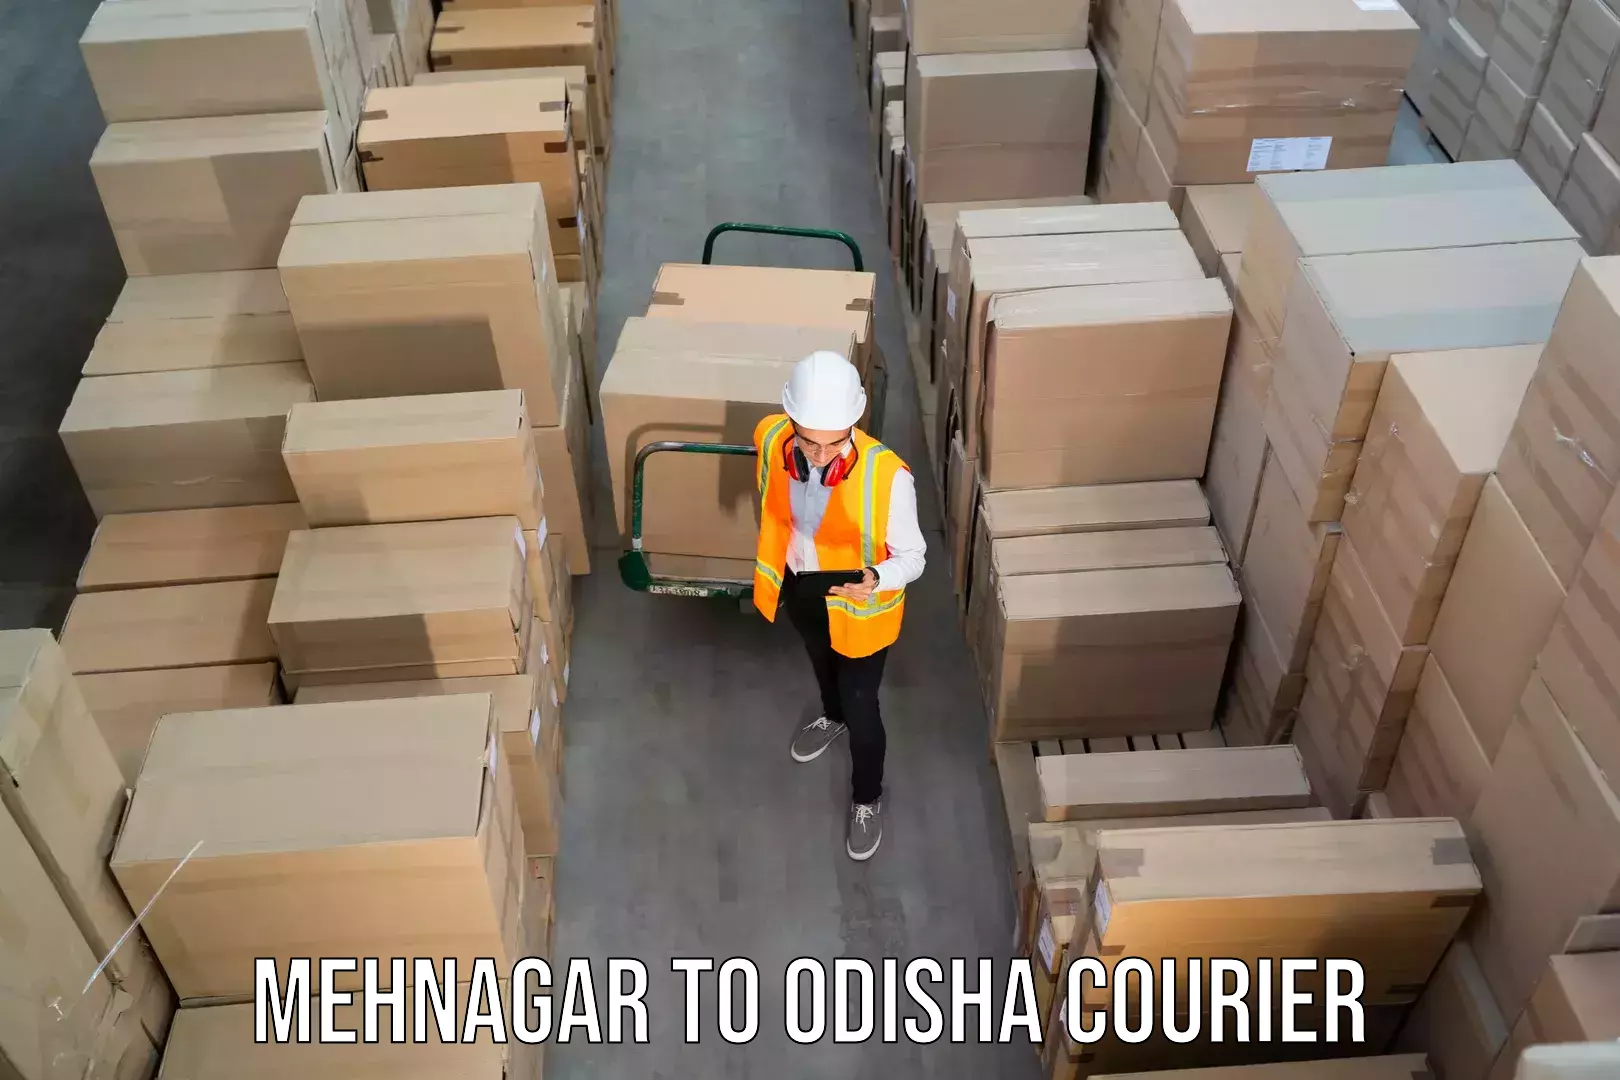 Round-the-clock parcel delivery Mehnagar to Odisha